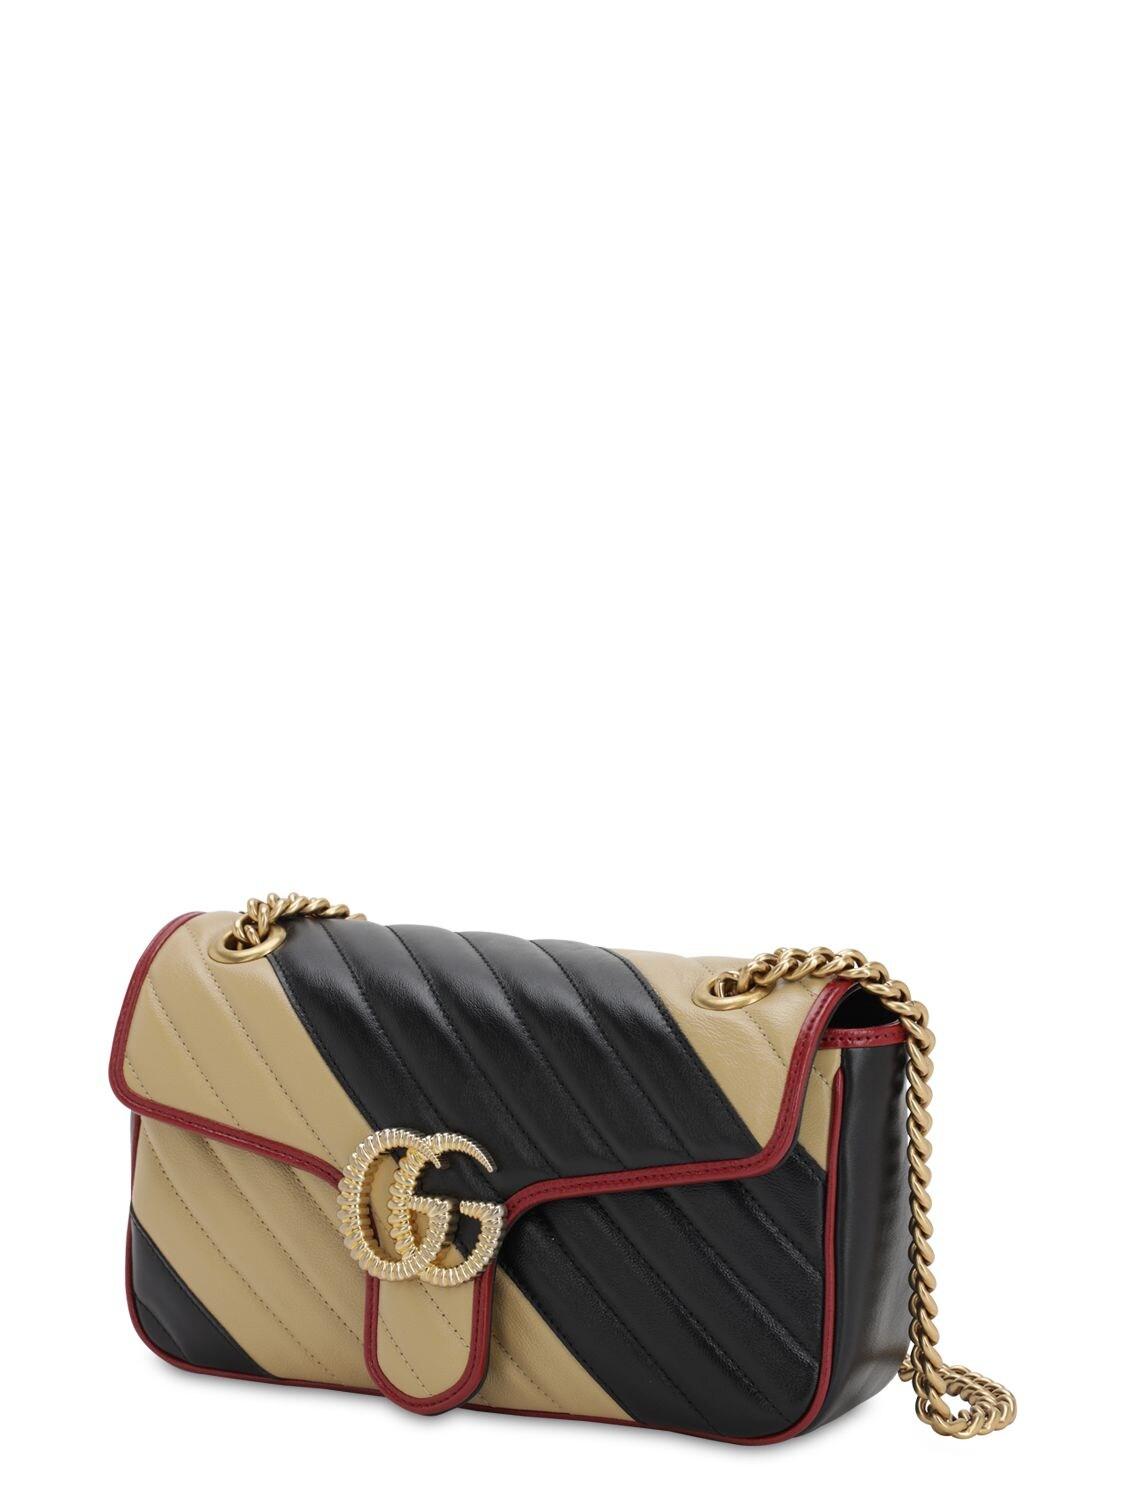 Gucci Small Gg Marmont 2.0 Bicolor Leather Bag in Black